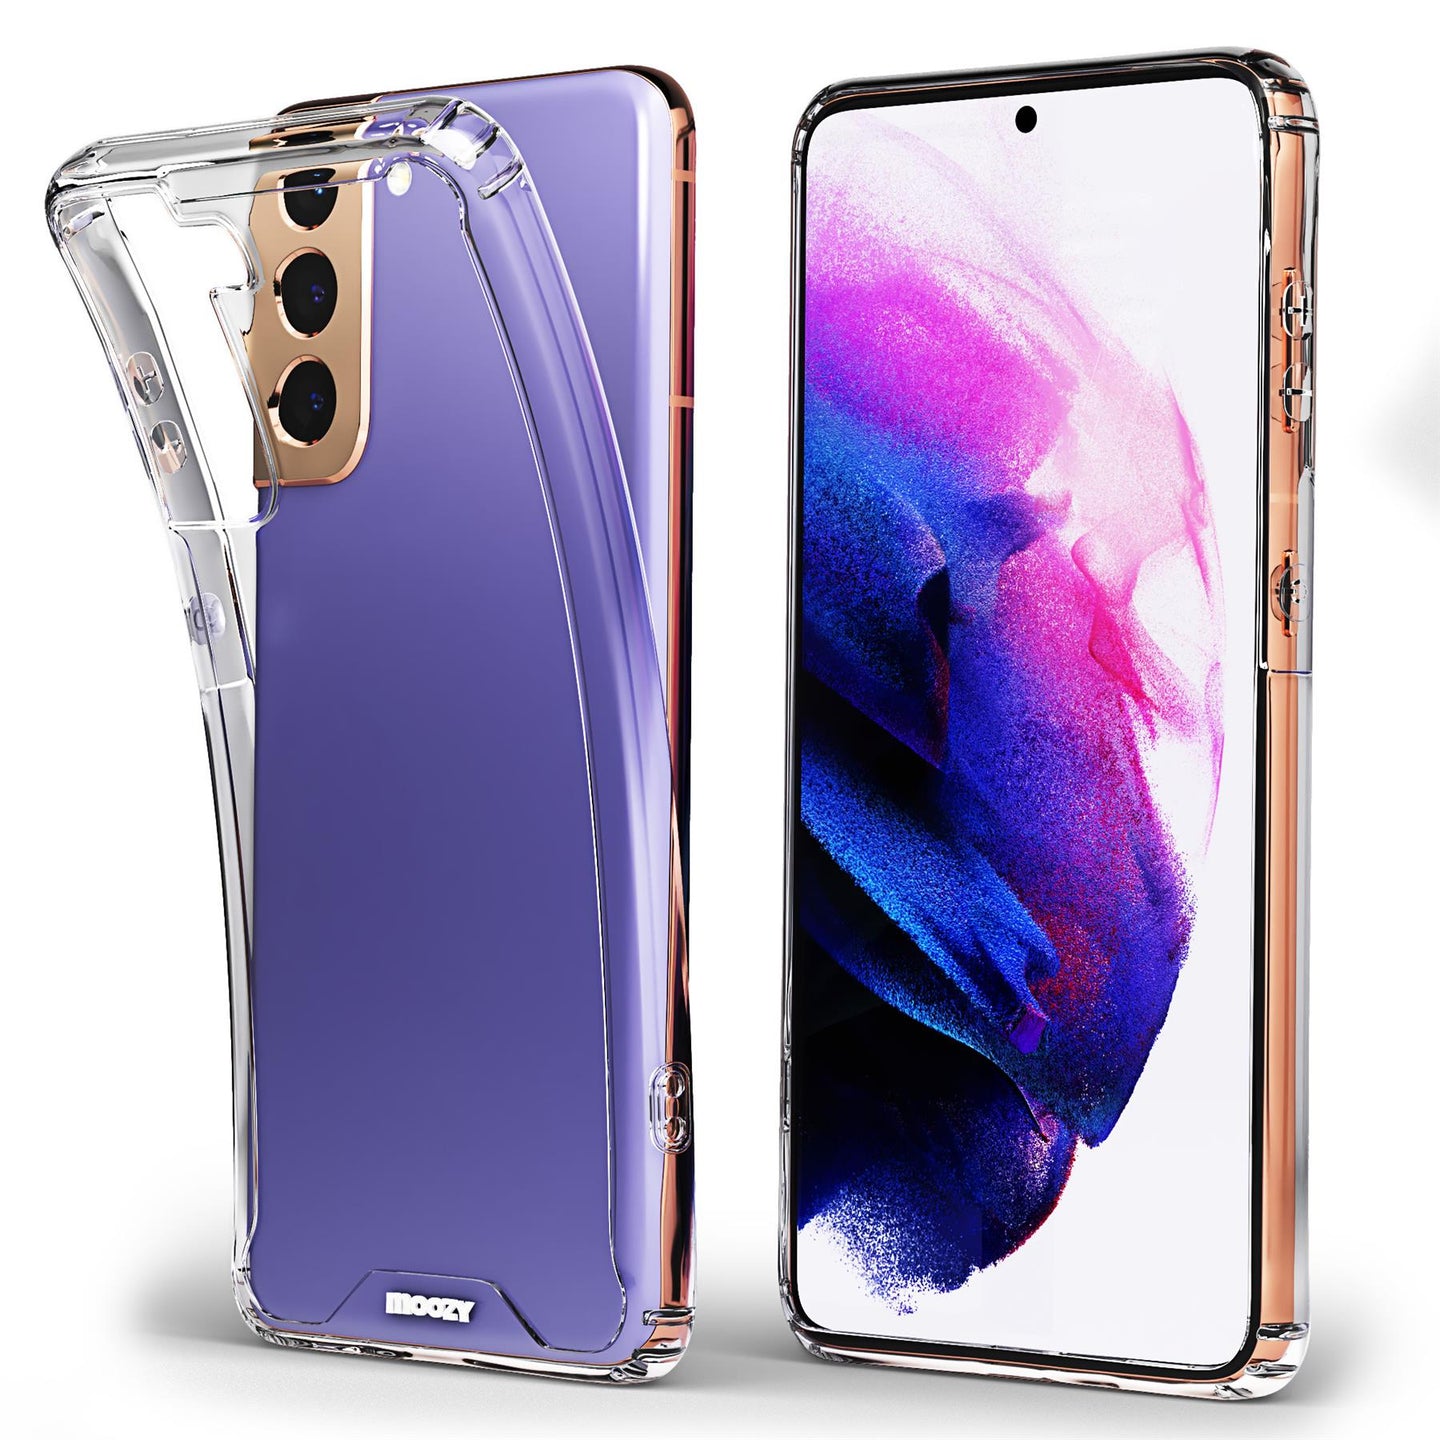 Moozy Xframe Shockproof Case for Samsung S21 5G and 4G - Transparent Rim Case, Double Colour Clear Hybrid Cover with Shock Absorbing TPU Rim